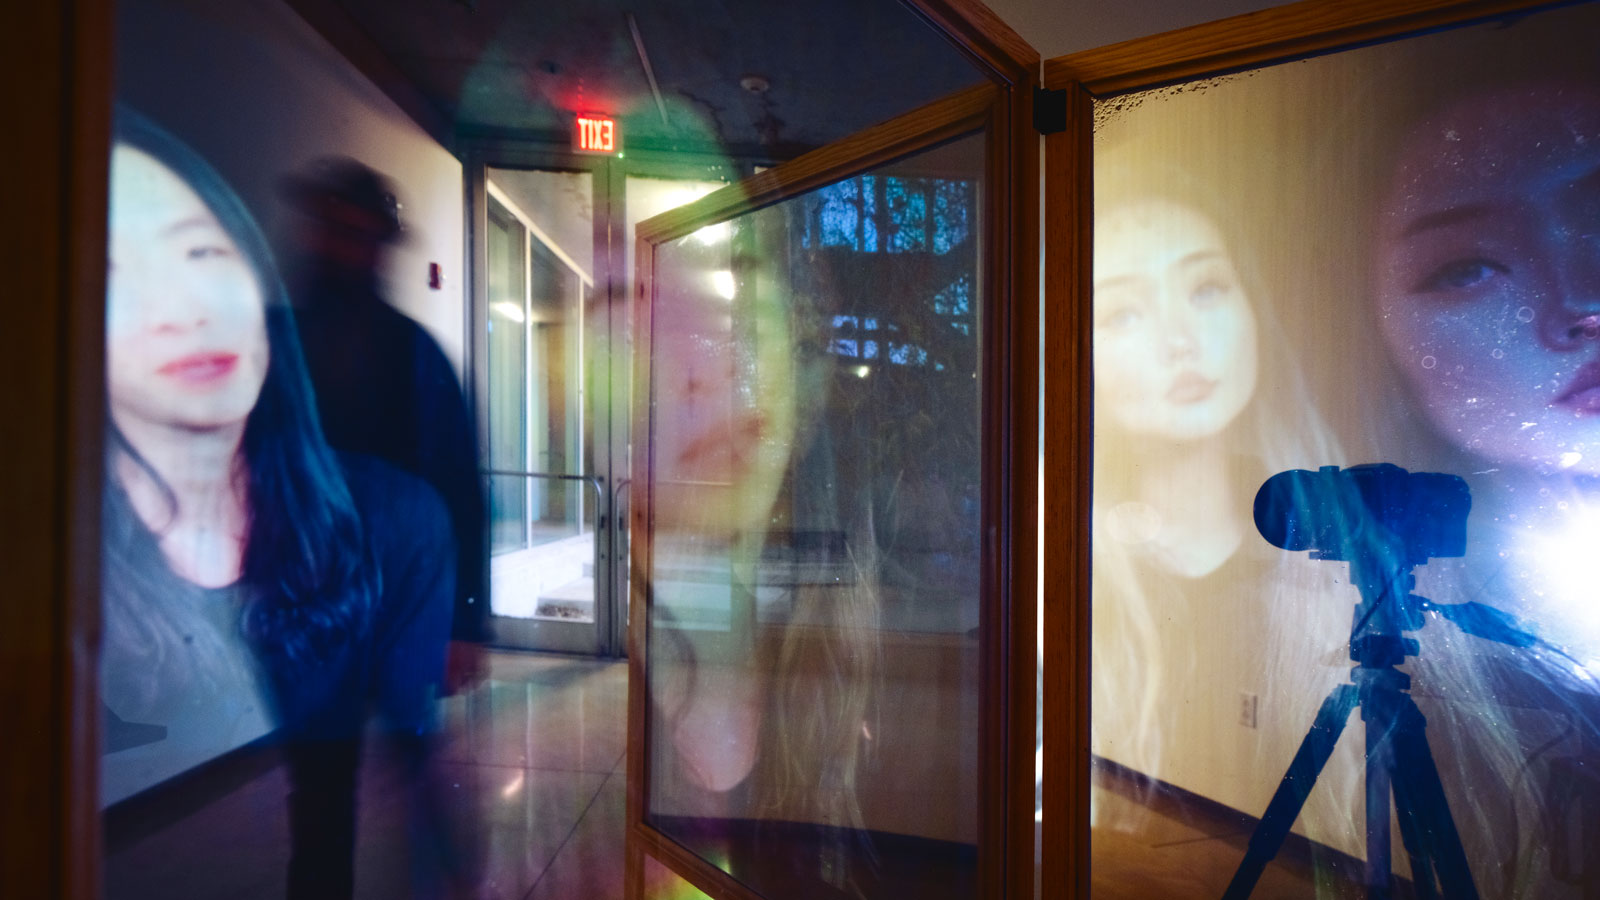 Vido projections of a woman in the work "Beauty Standards"